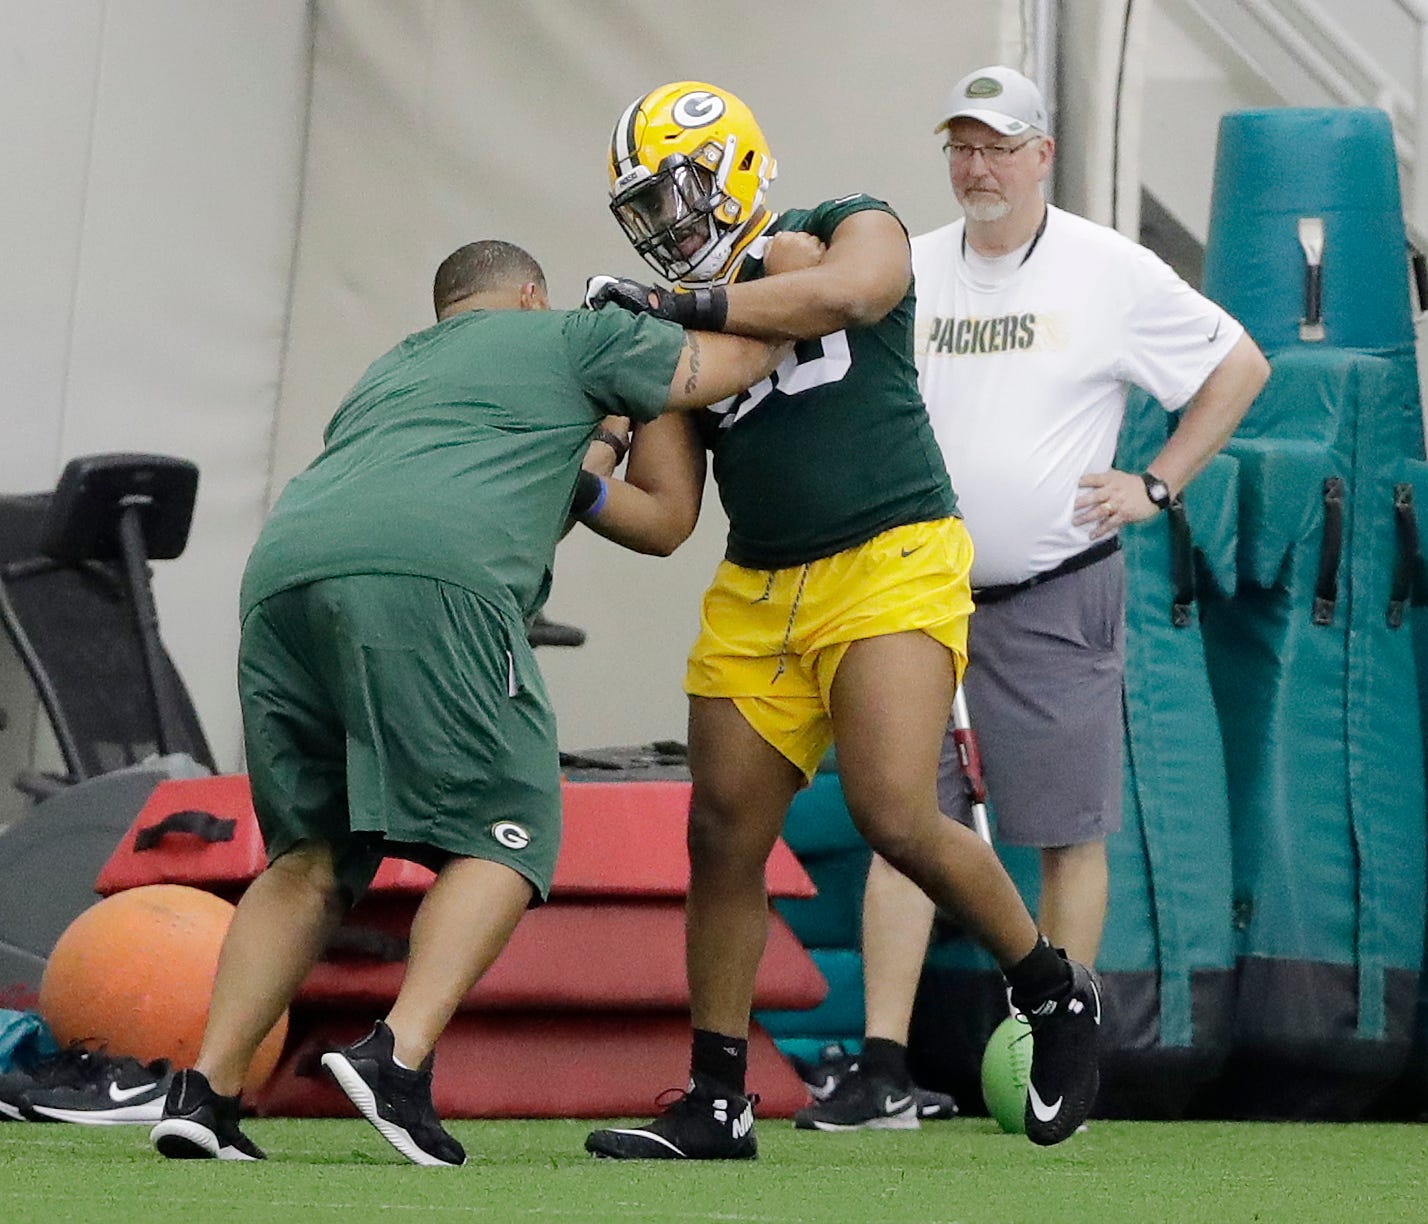 Green Bay Packers defensive lineman Kingsley Keke (96) during practice at rookie minicamp at the Don Hutson Center on Friday, May 3, 2019 in Ashwaubenon, Wis.
Adam Wesley/USA TODAY NETWORK-Wis